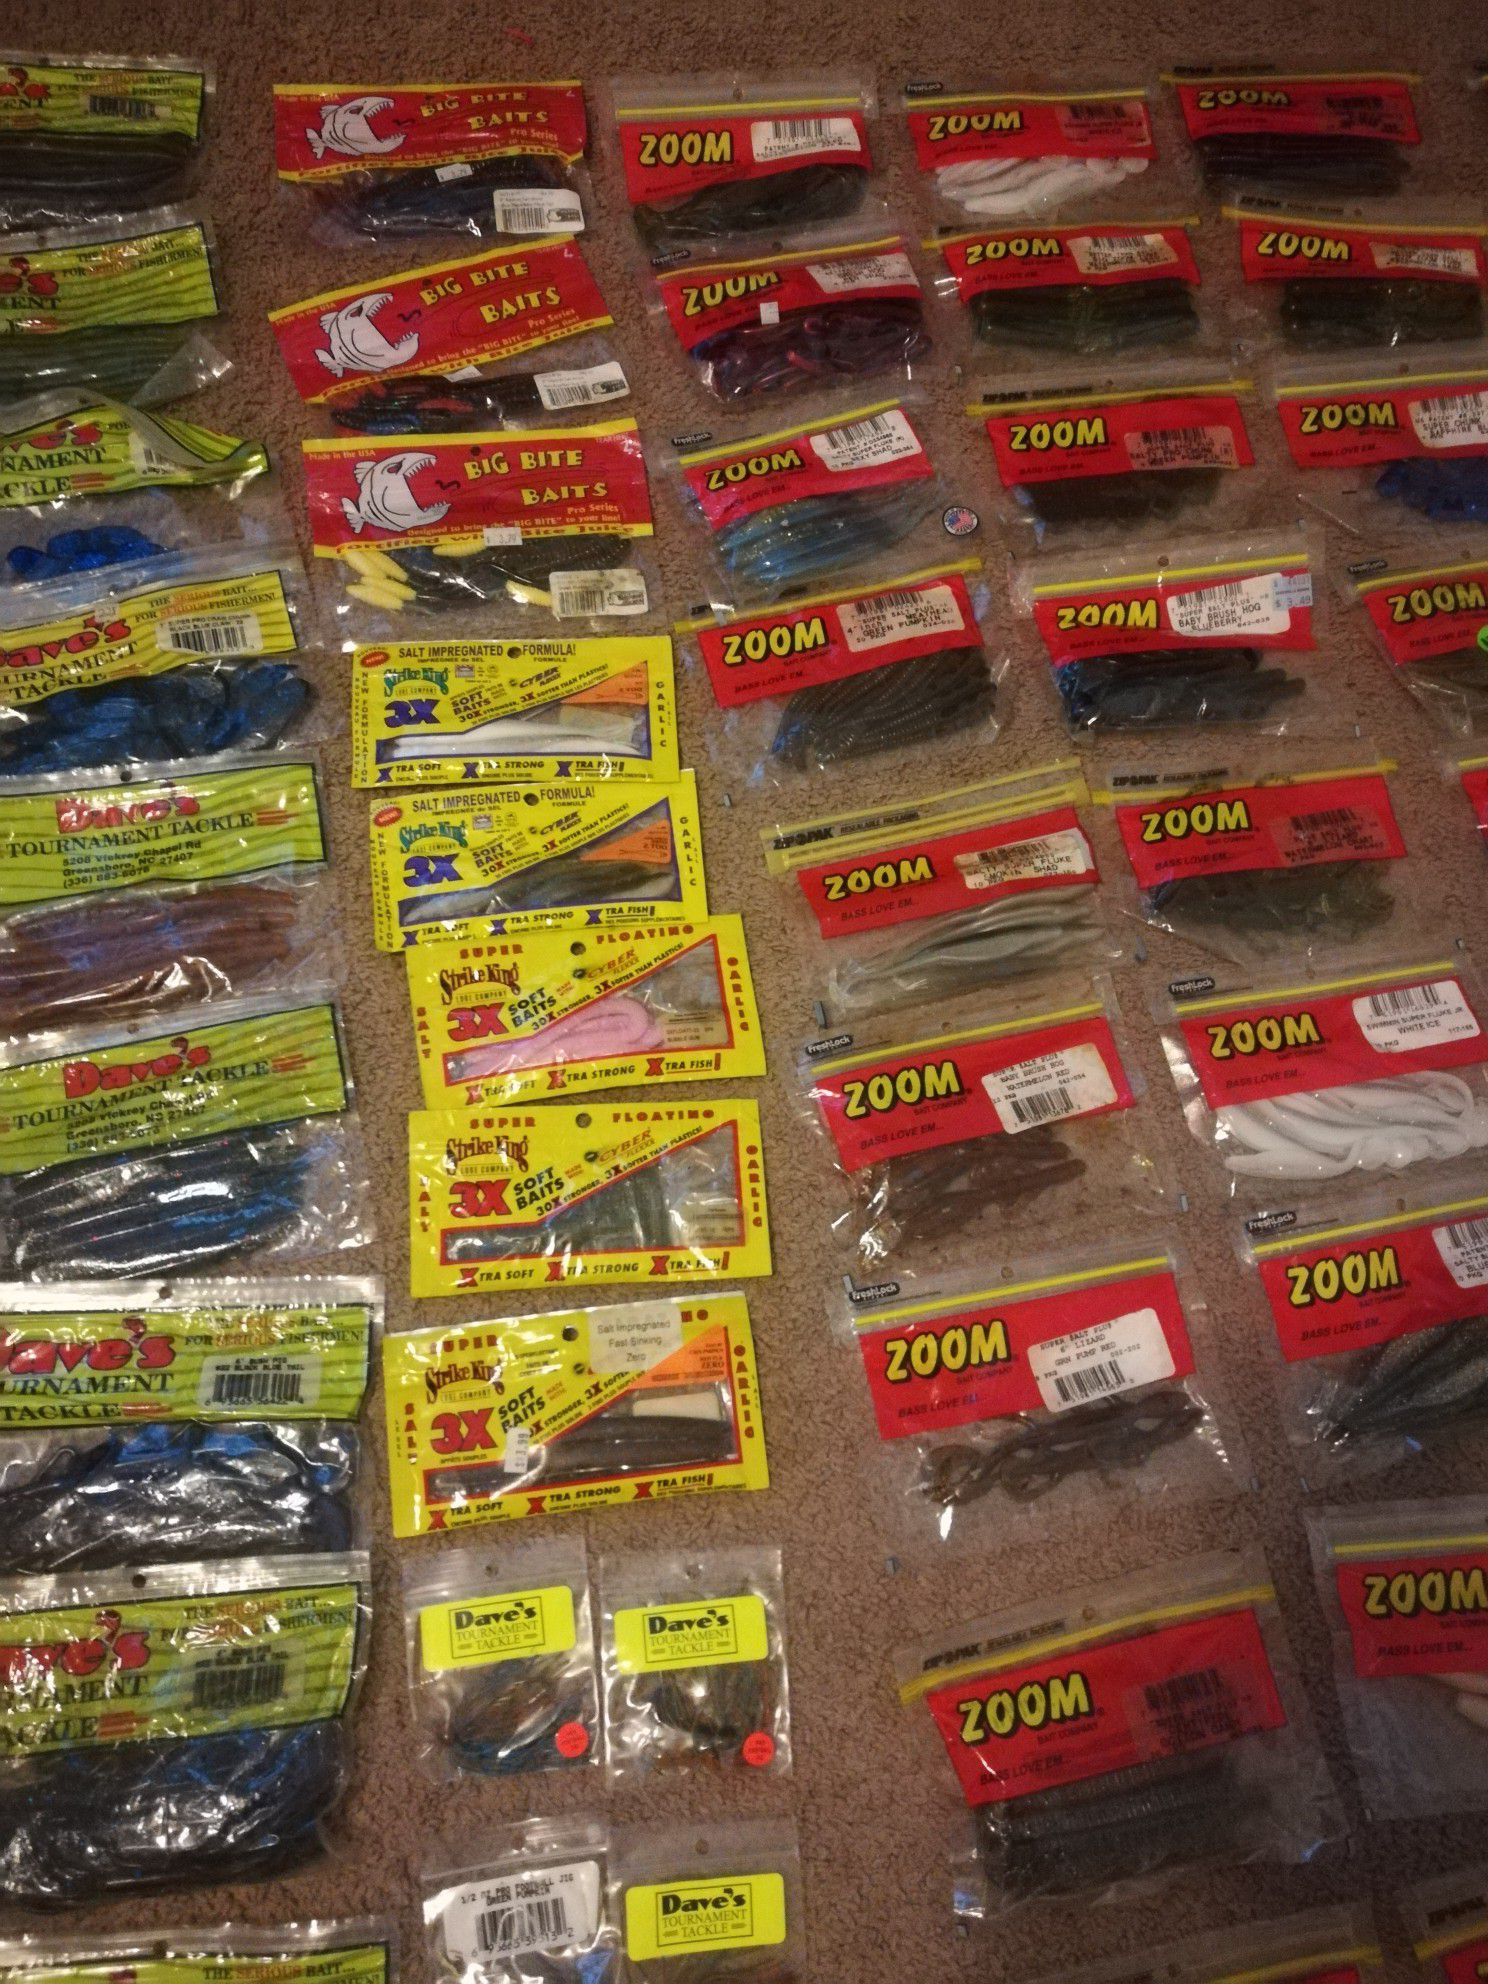 Fishing plastic worms lures 89 bags for Sale in Suffield, CT - OfferUp